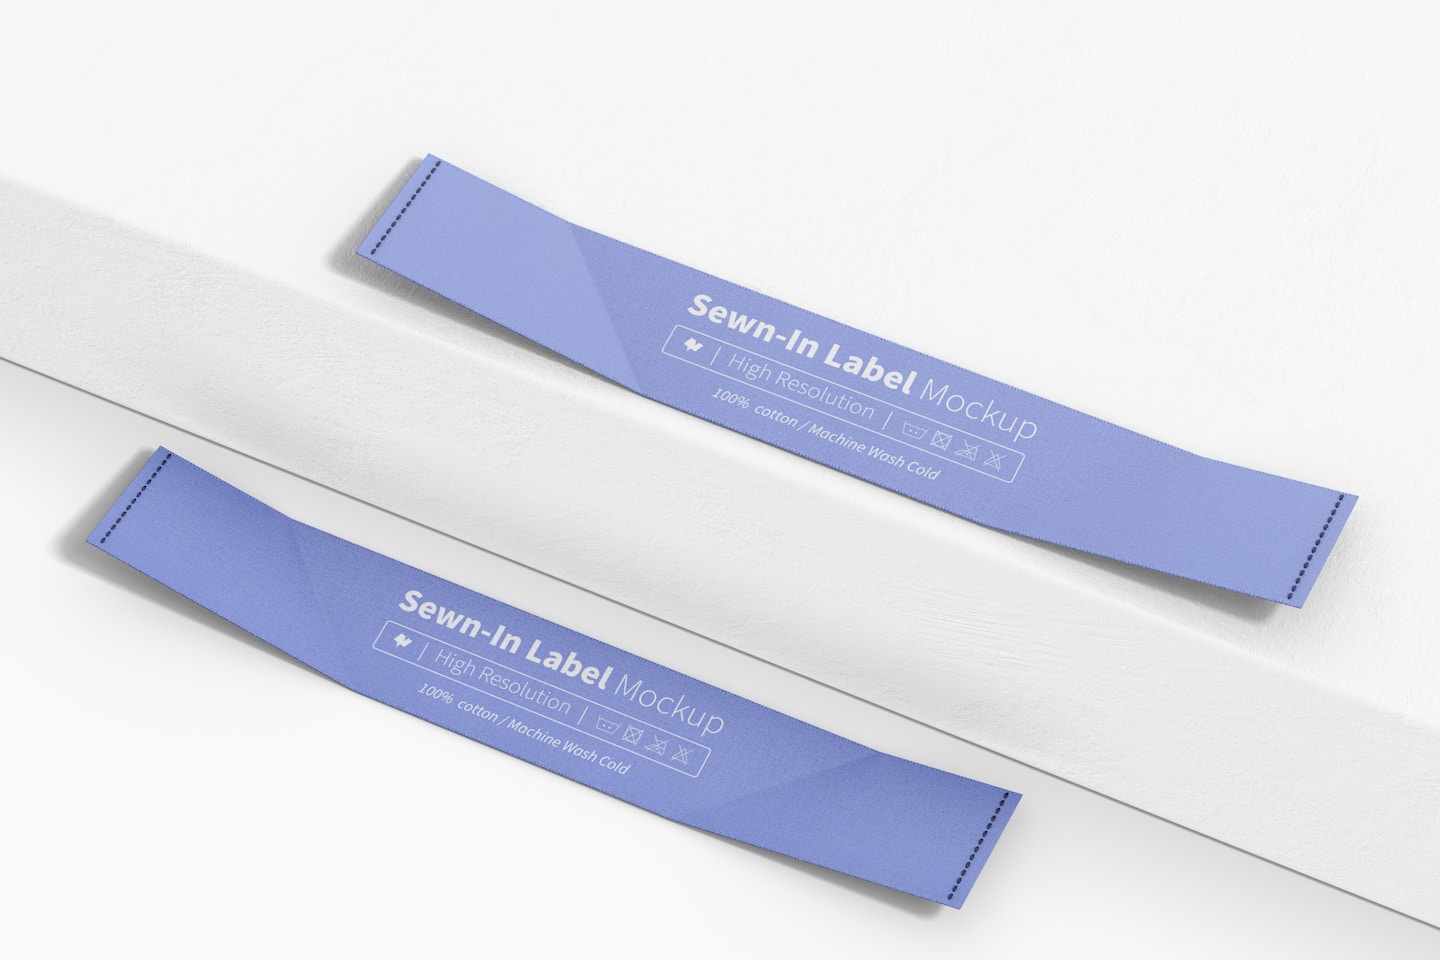 Sewn-In Labels on Surface Mockup